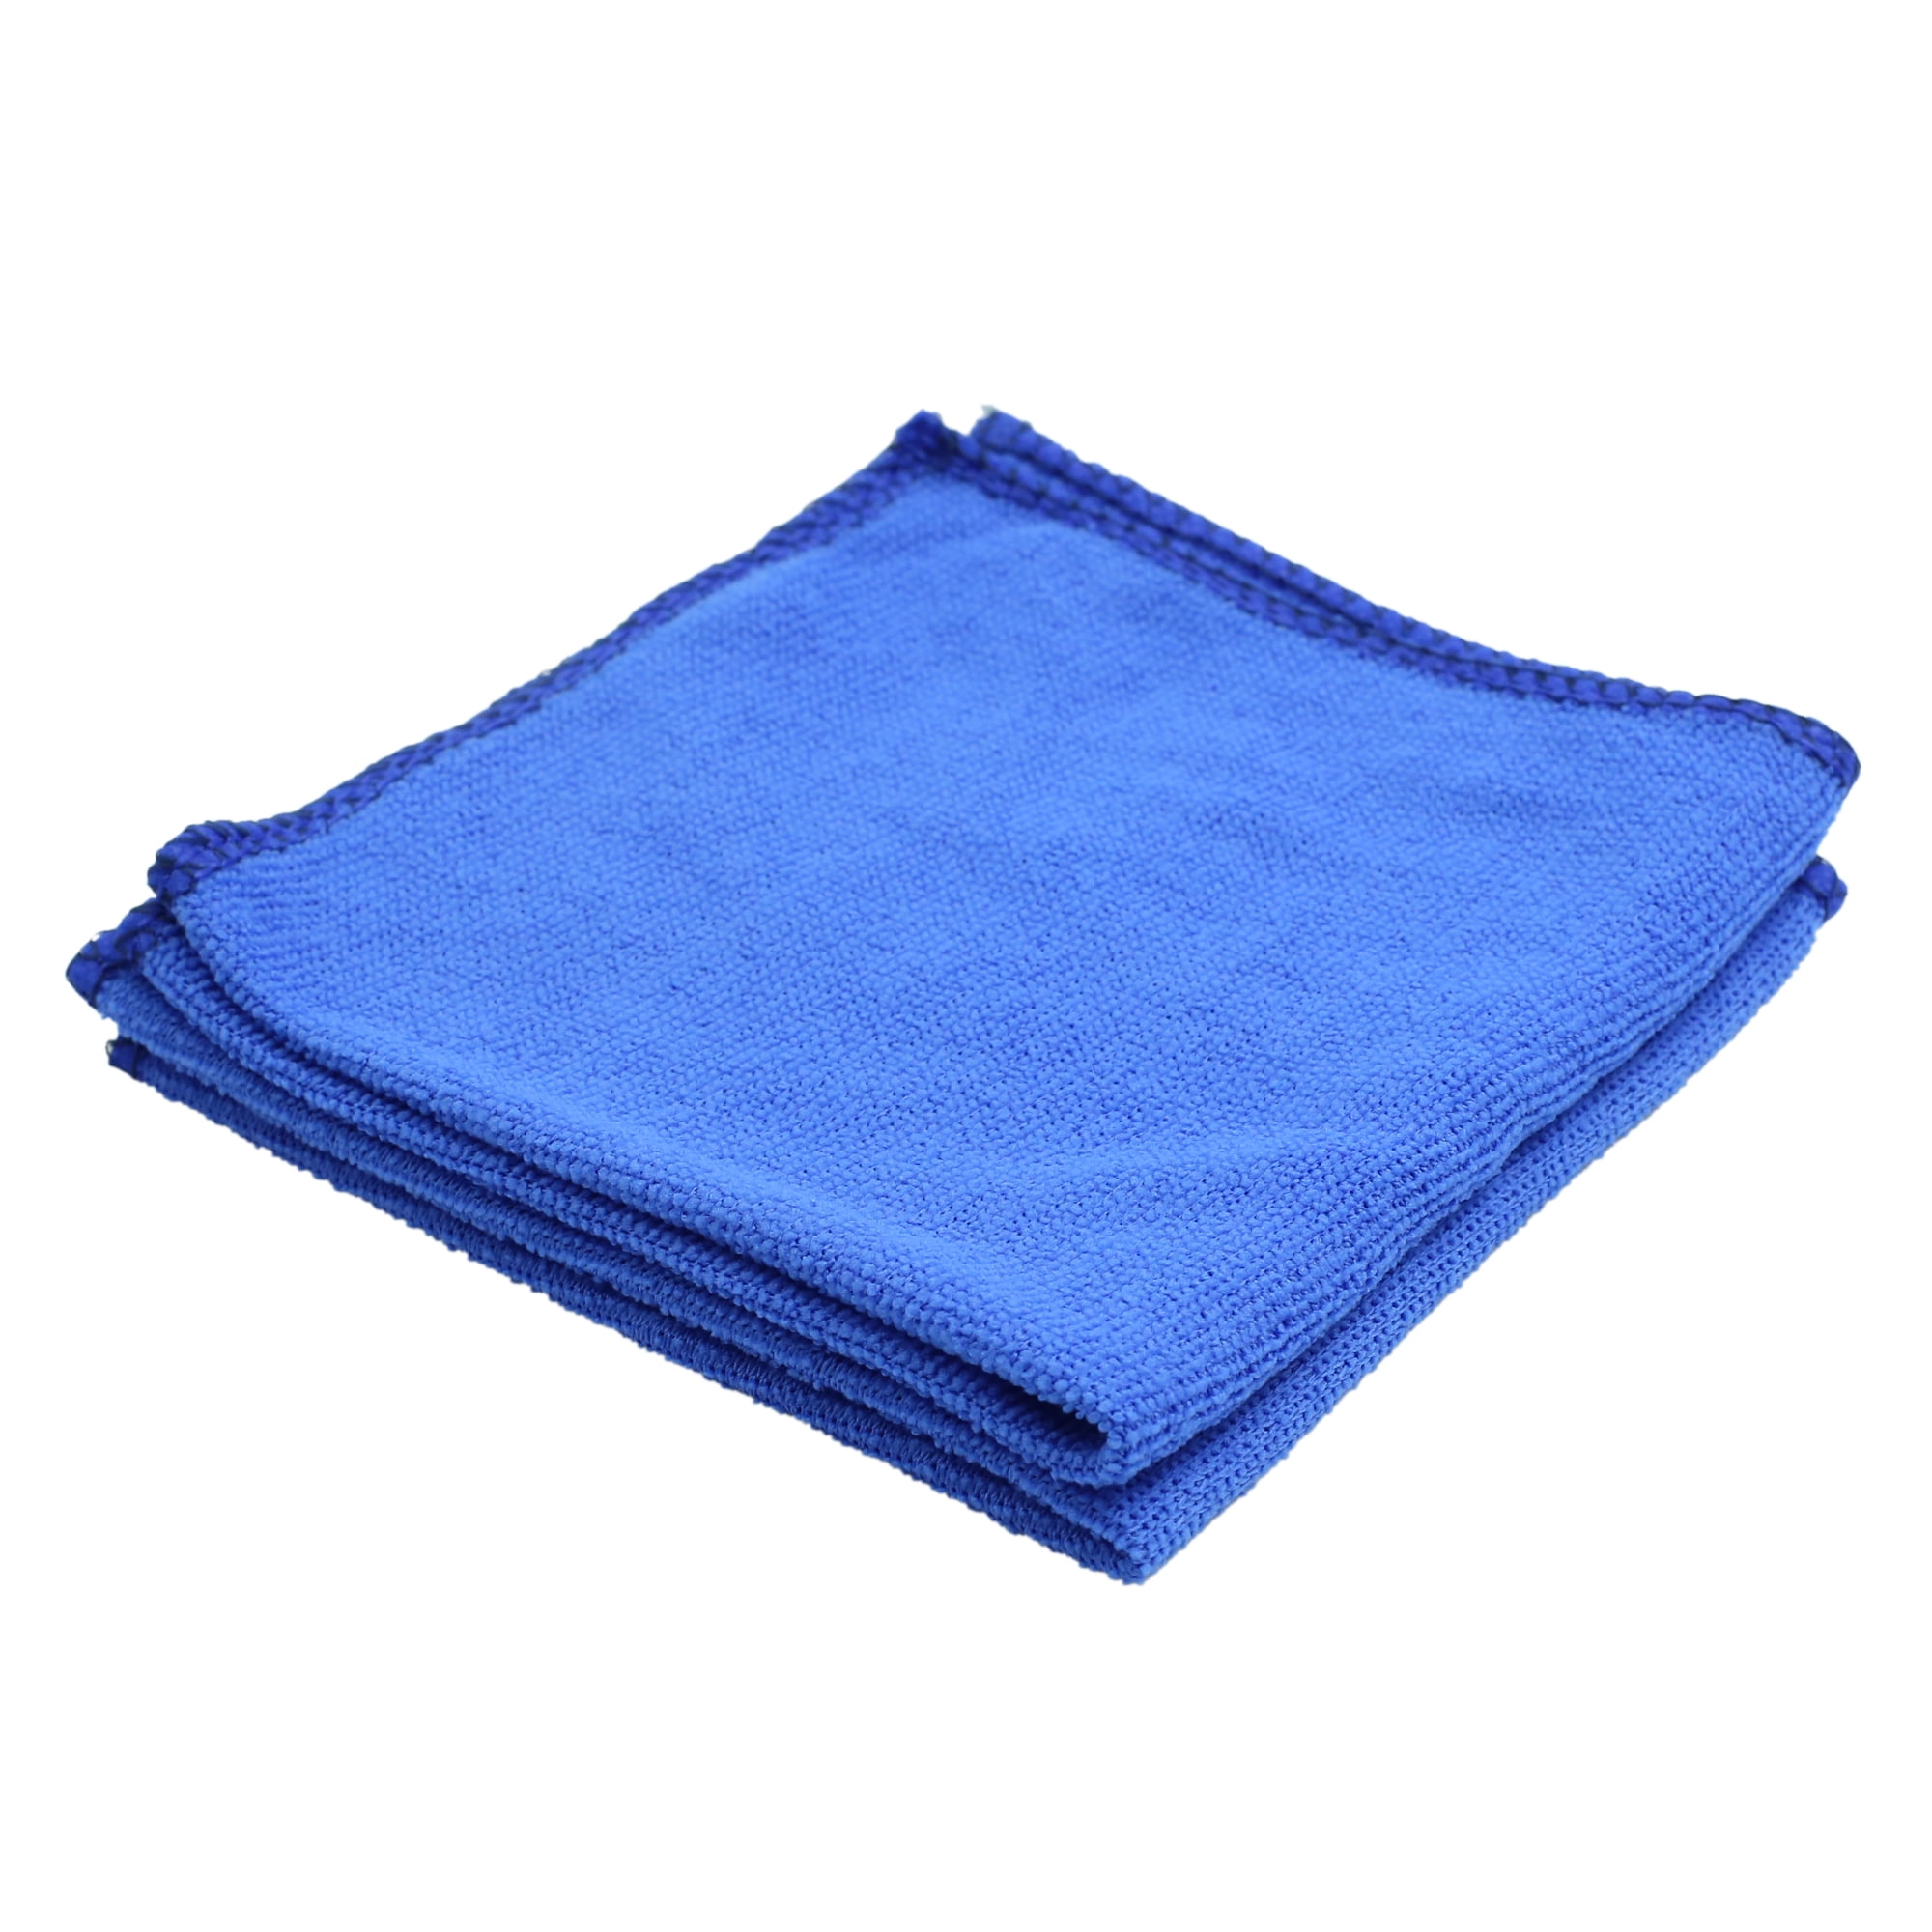 2pcs Car Truck Wash Cleaning Drying Cloth Rinse Absorbent Soft Microfiber Towel 